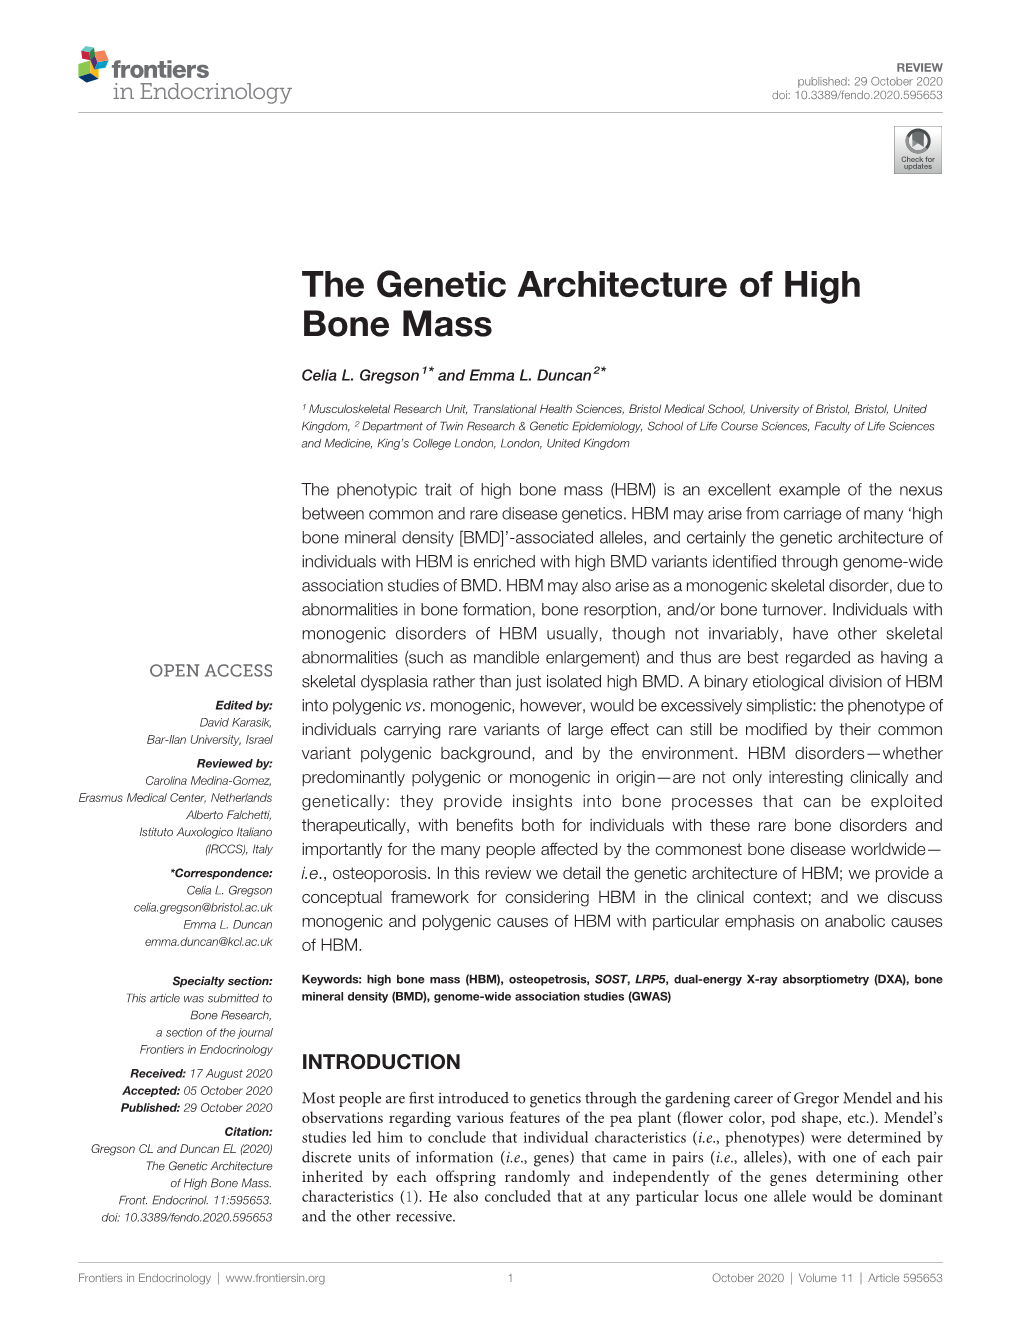 The Genetic Architecture of High Bone Mass